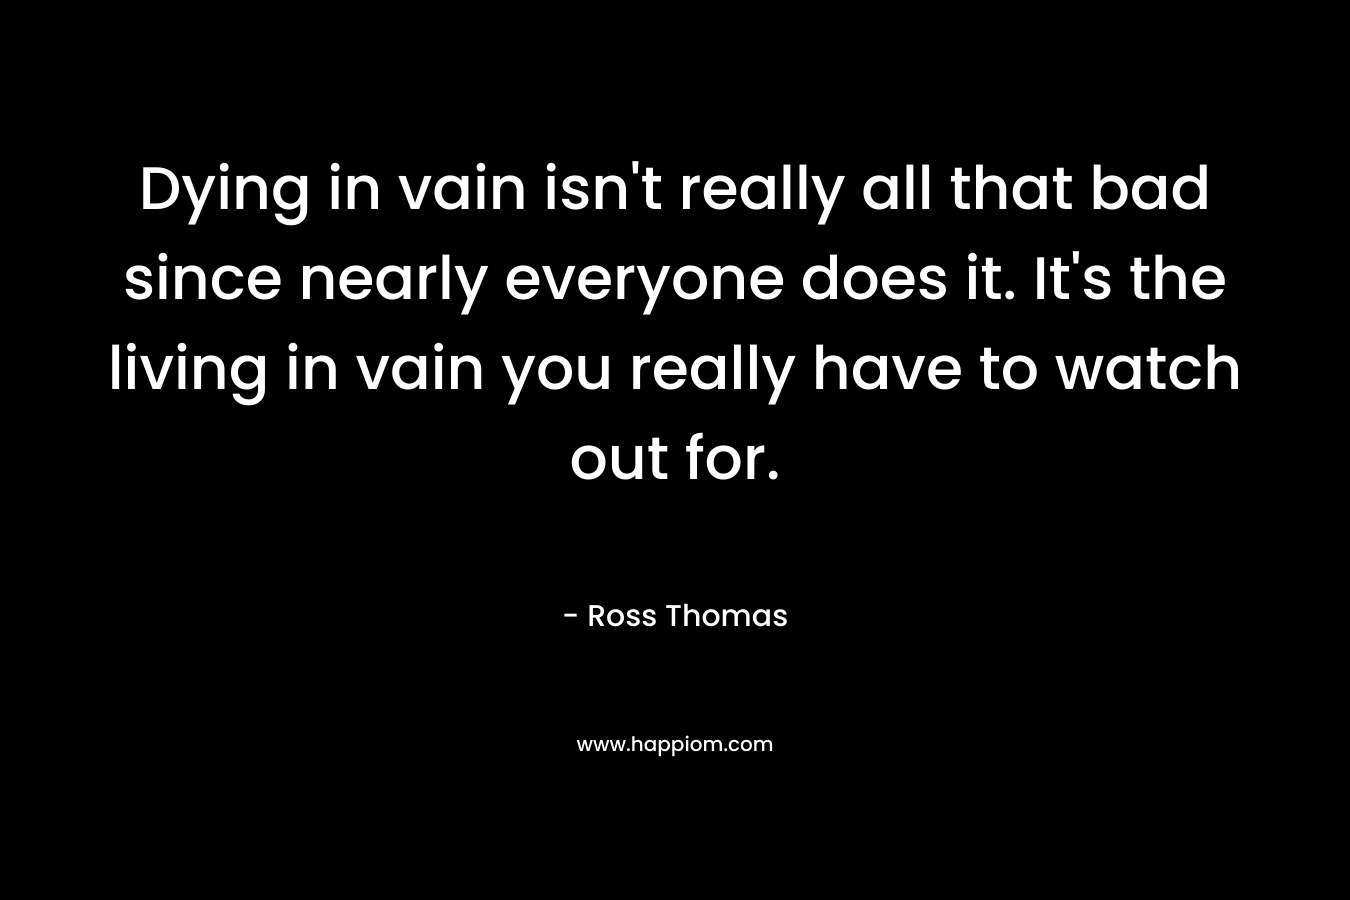 Dying in vain isn’t really all that bad since nearly everyone does it. It’s the living in vain you really have to watch out for. – Ross Thomas